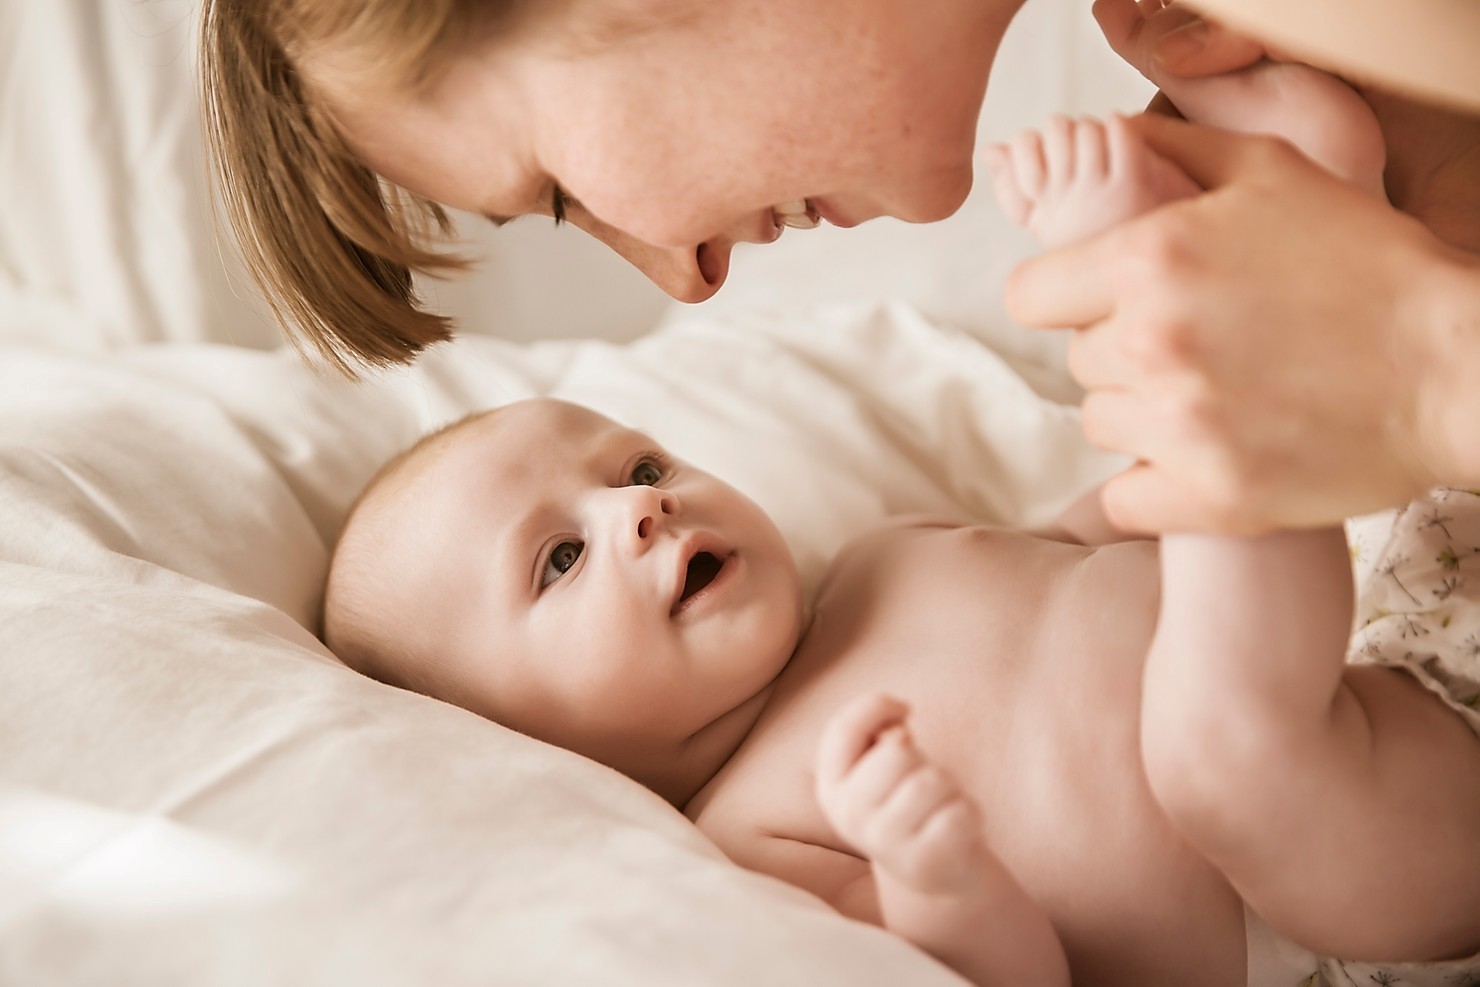 The question 'is homeopathy safe?' is frequently answered positively when treating babies.